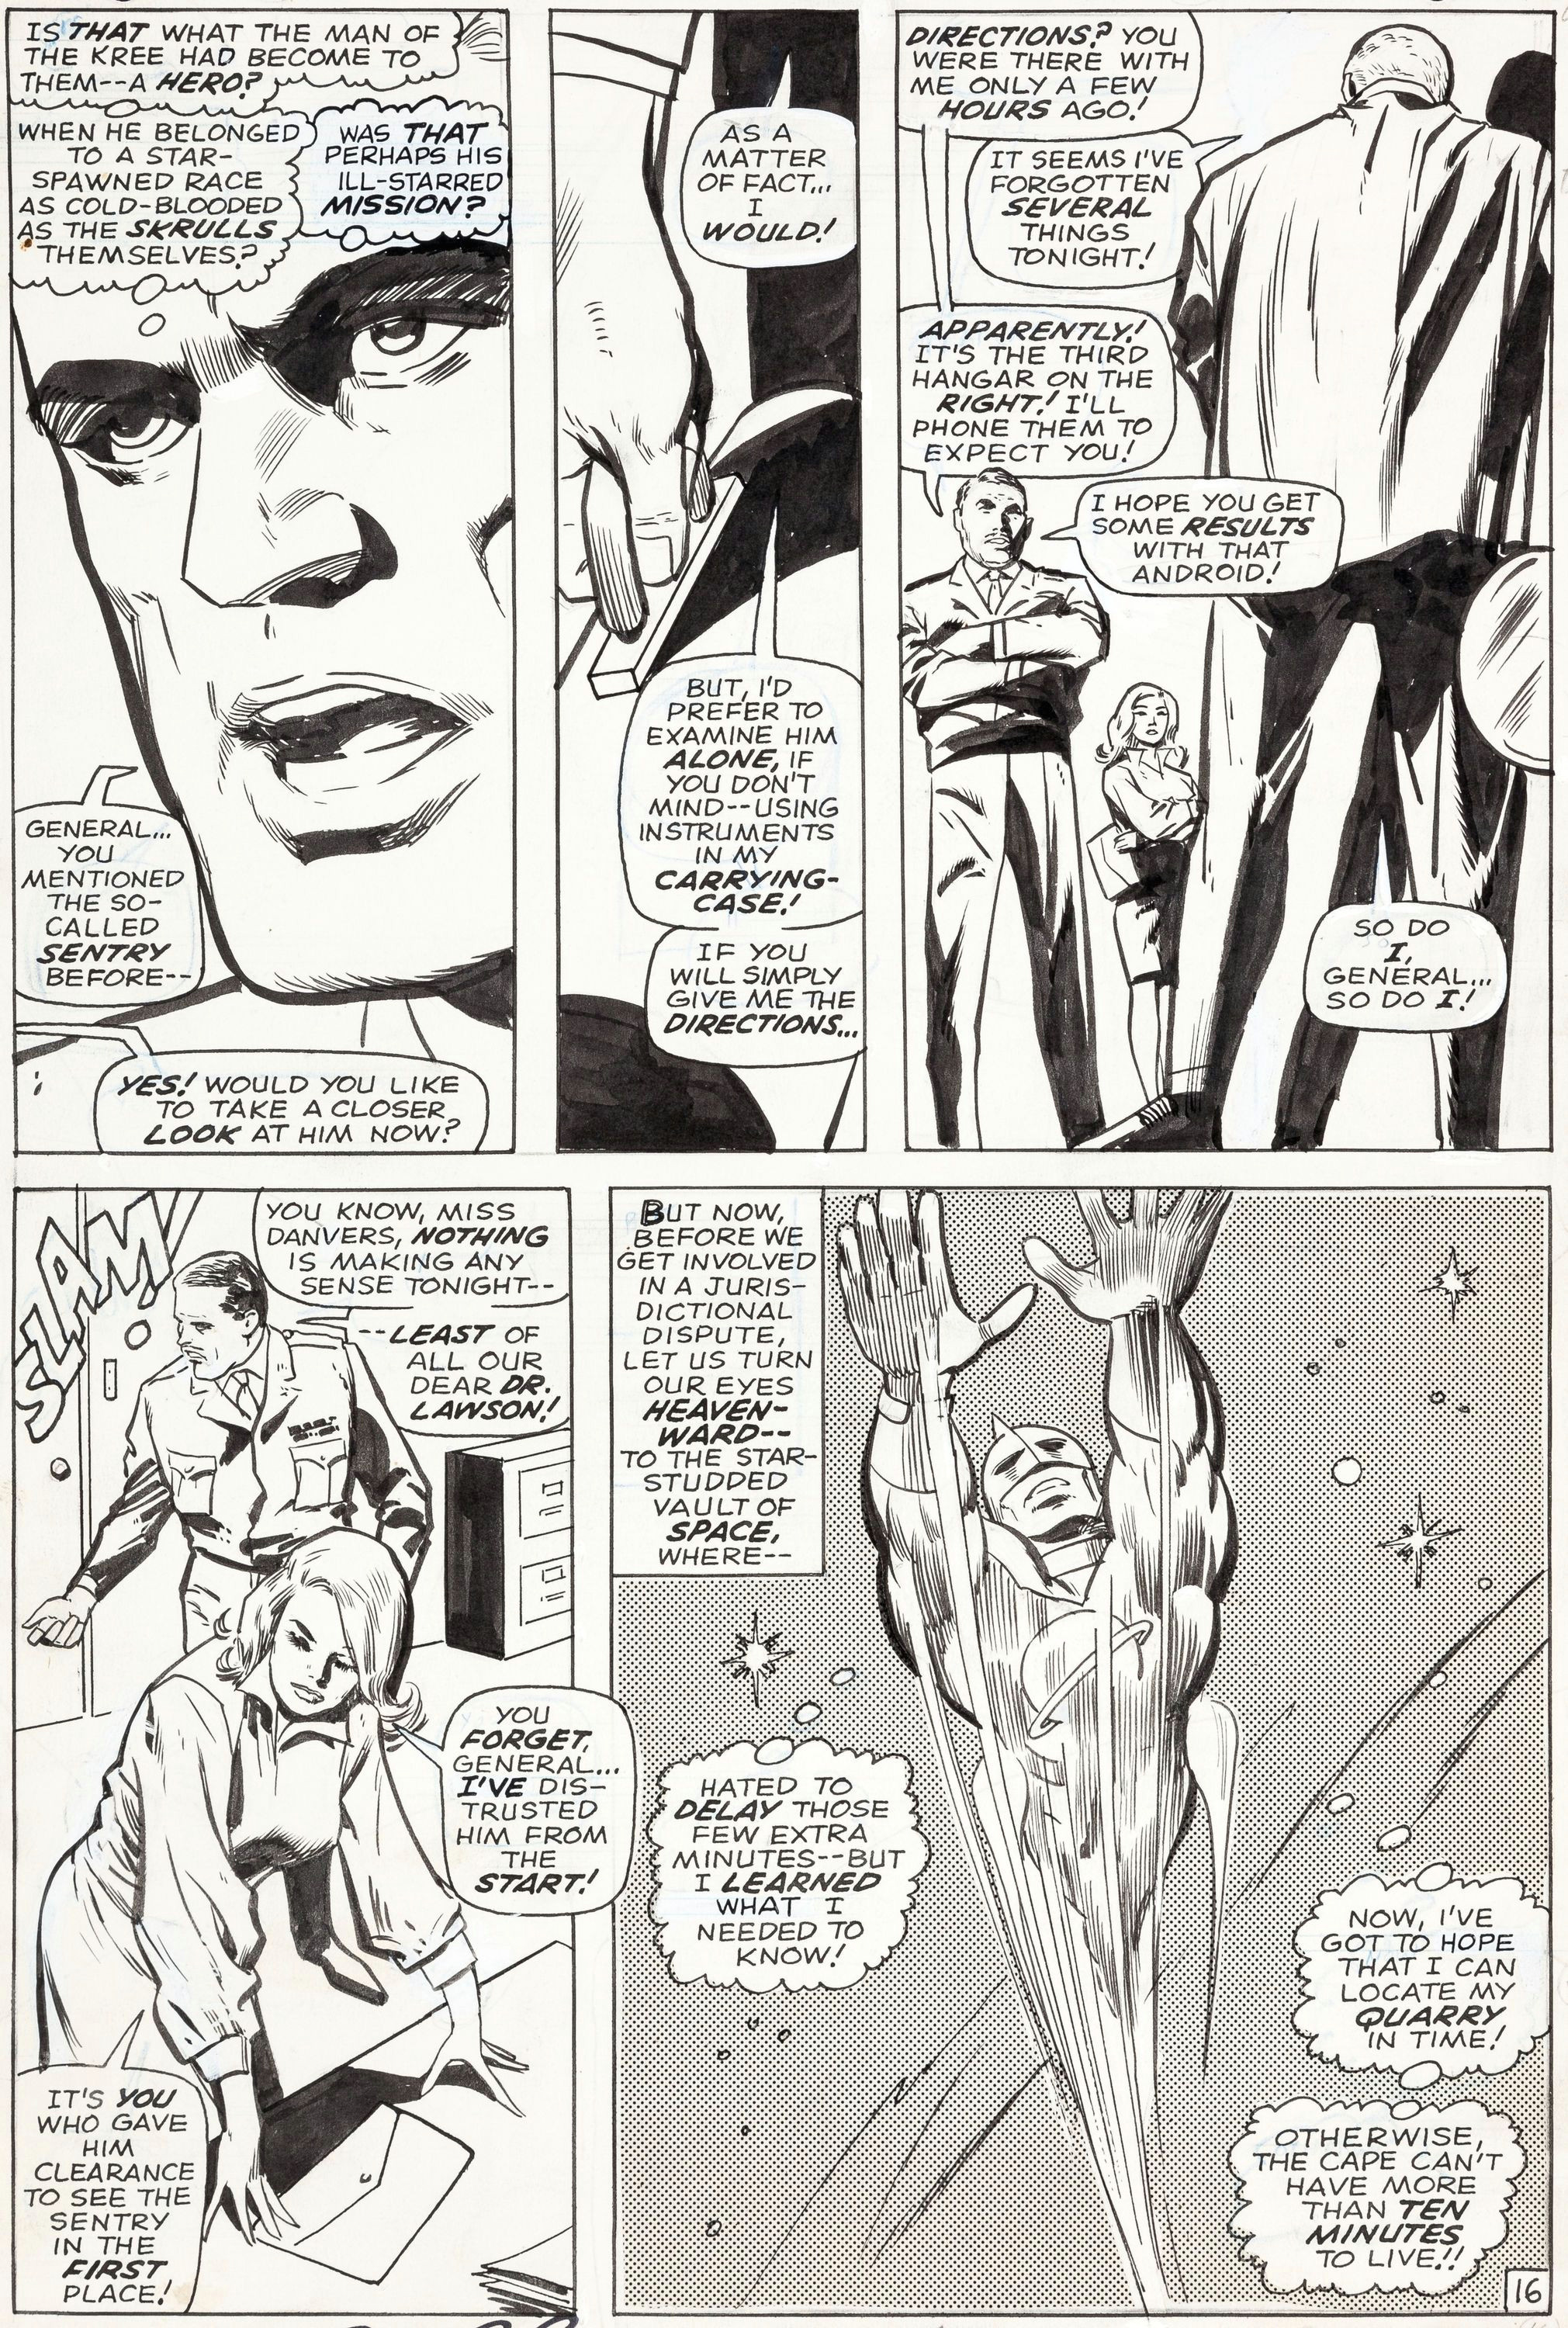 gene colan and vince colletta captain marvel 3 page 16 original lot 93338 heritage auctions